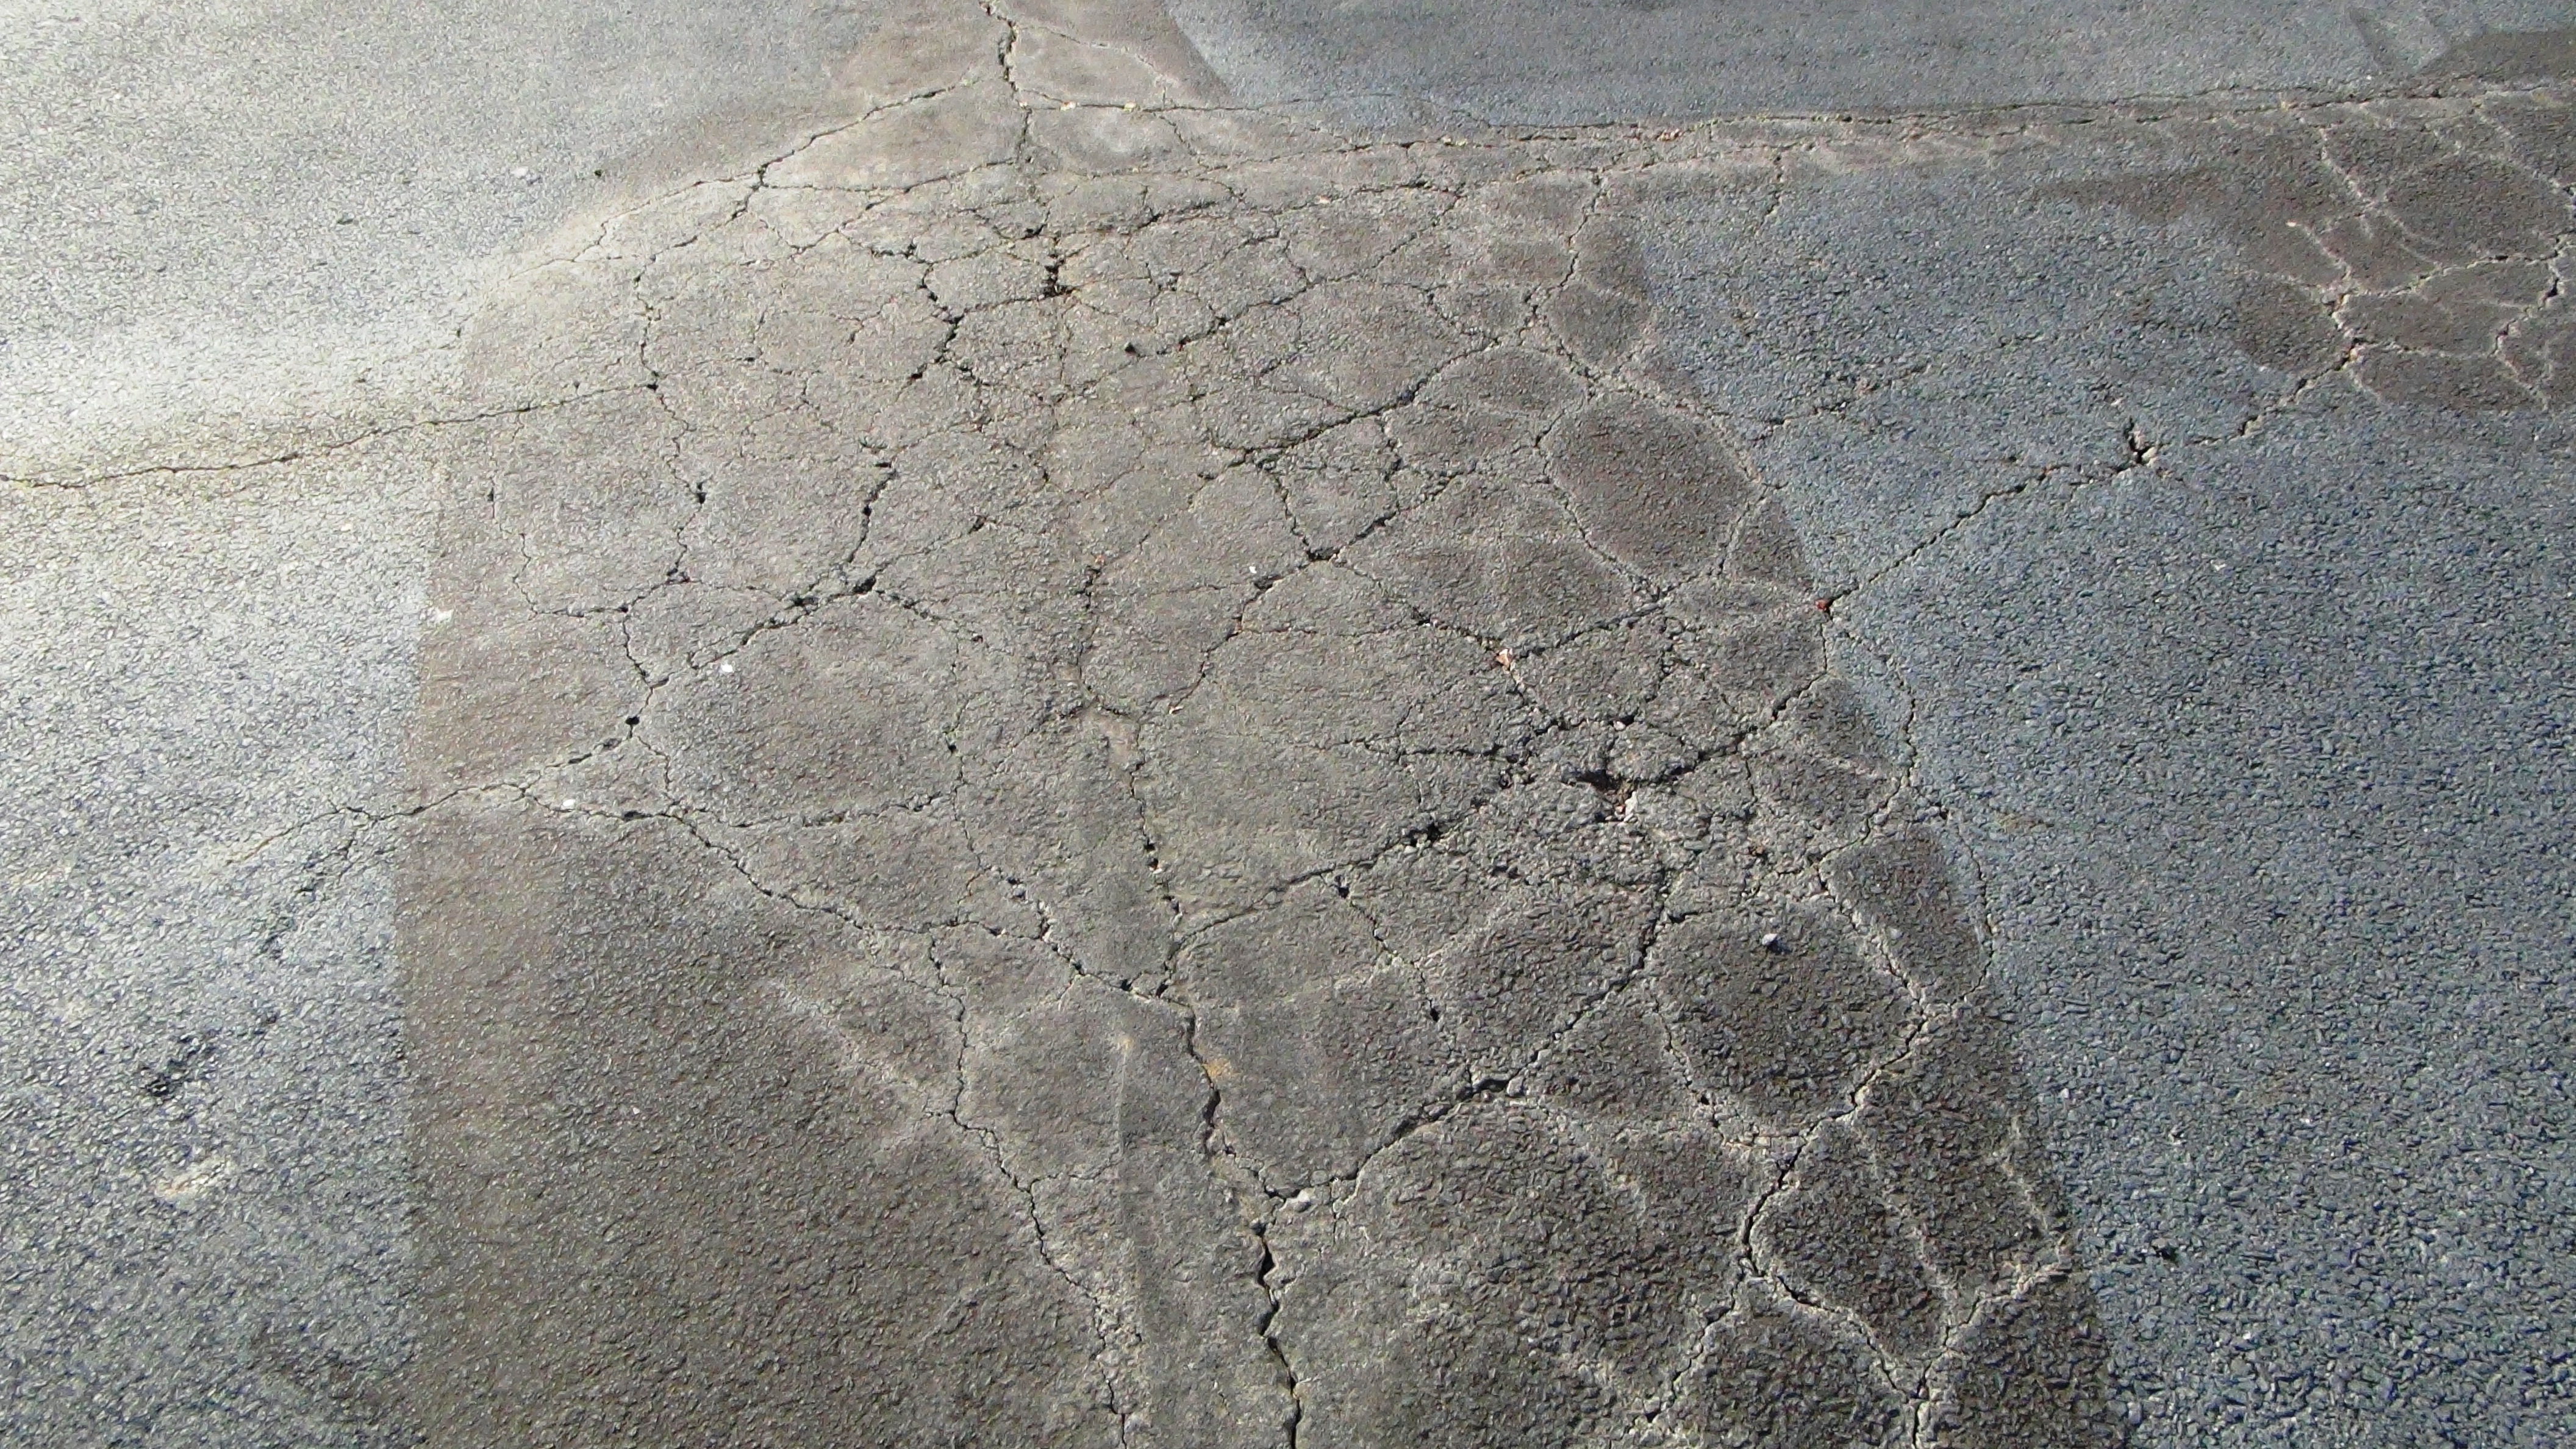 Different Types of Asphalt Distresses & How to Treat Them